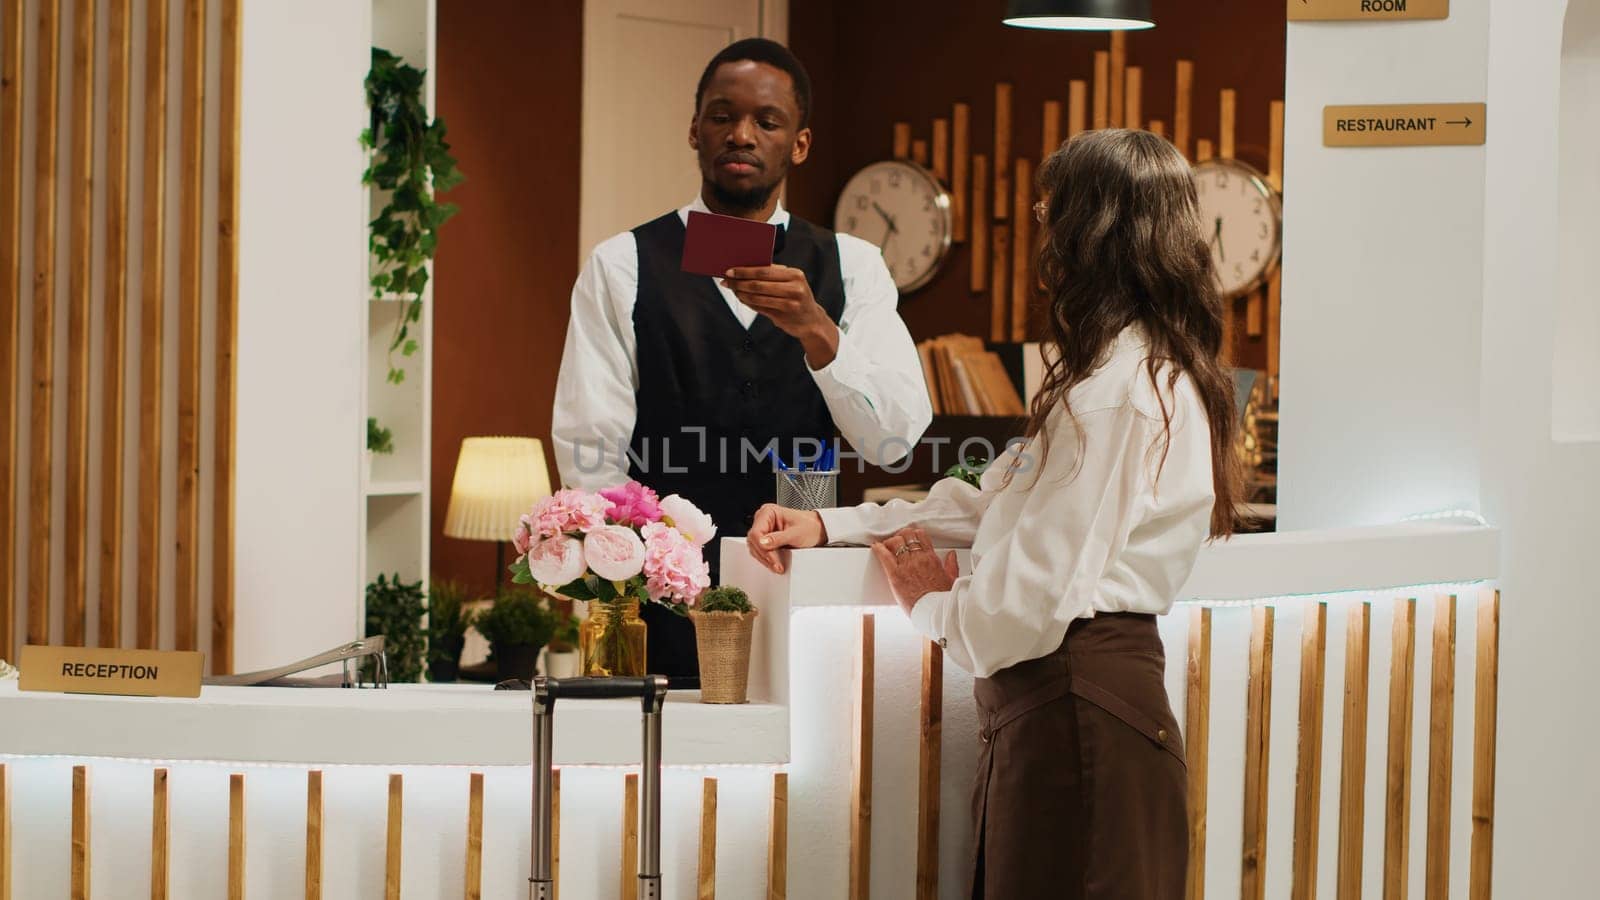 Hotel receptionist assists woman with check in, verifying identity on passport and retrieving reservation details. African american worker checks personal document of tourist at resort.